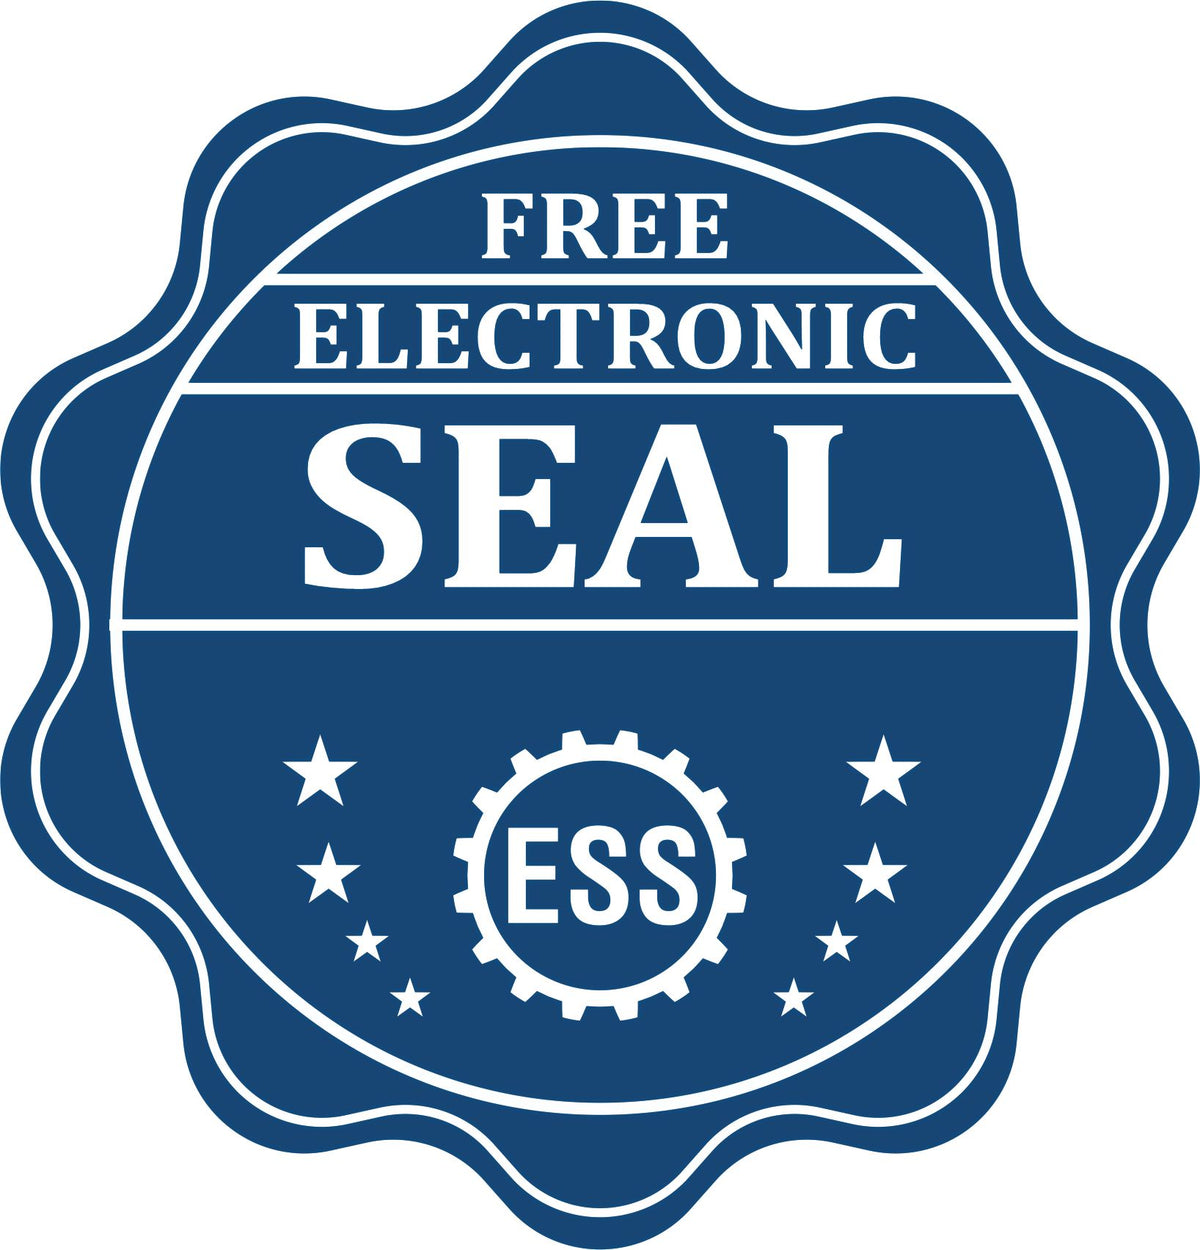 A badge showing a free electronic seal for the Soft Nevada Professional Geologist Seal with stars and the ESS gear on the emblem.